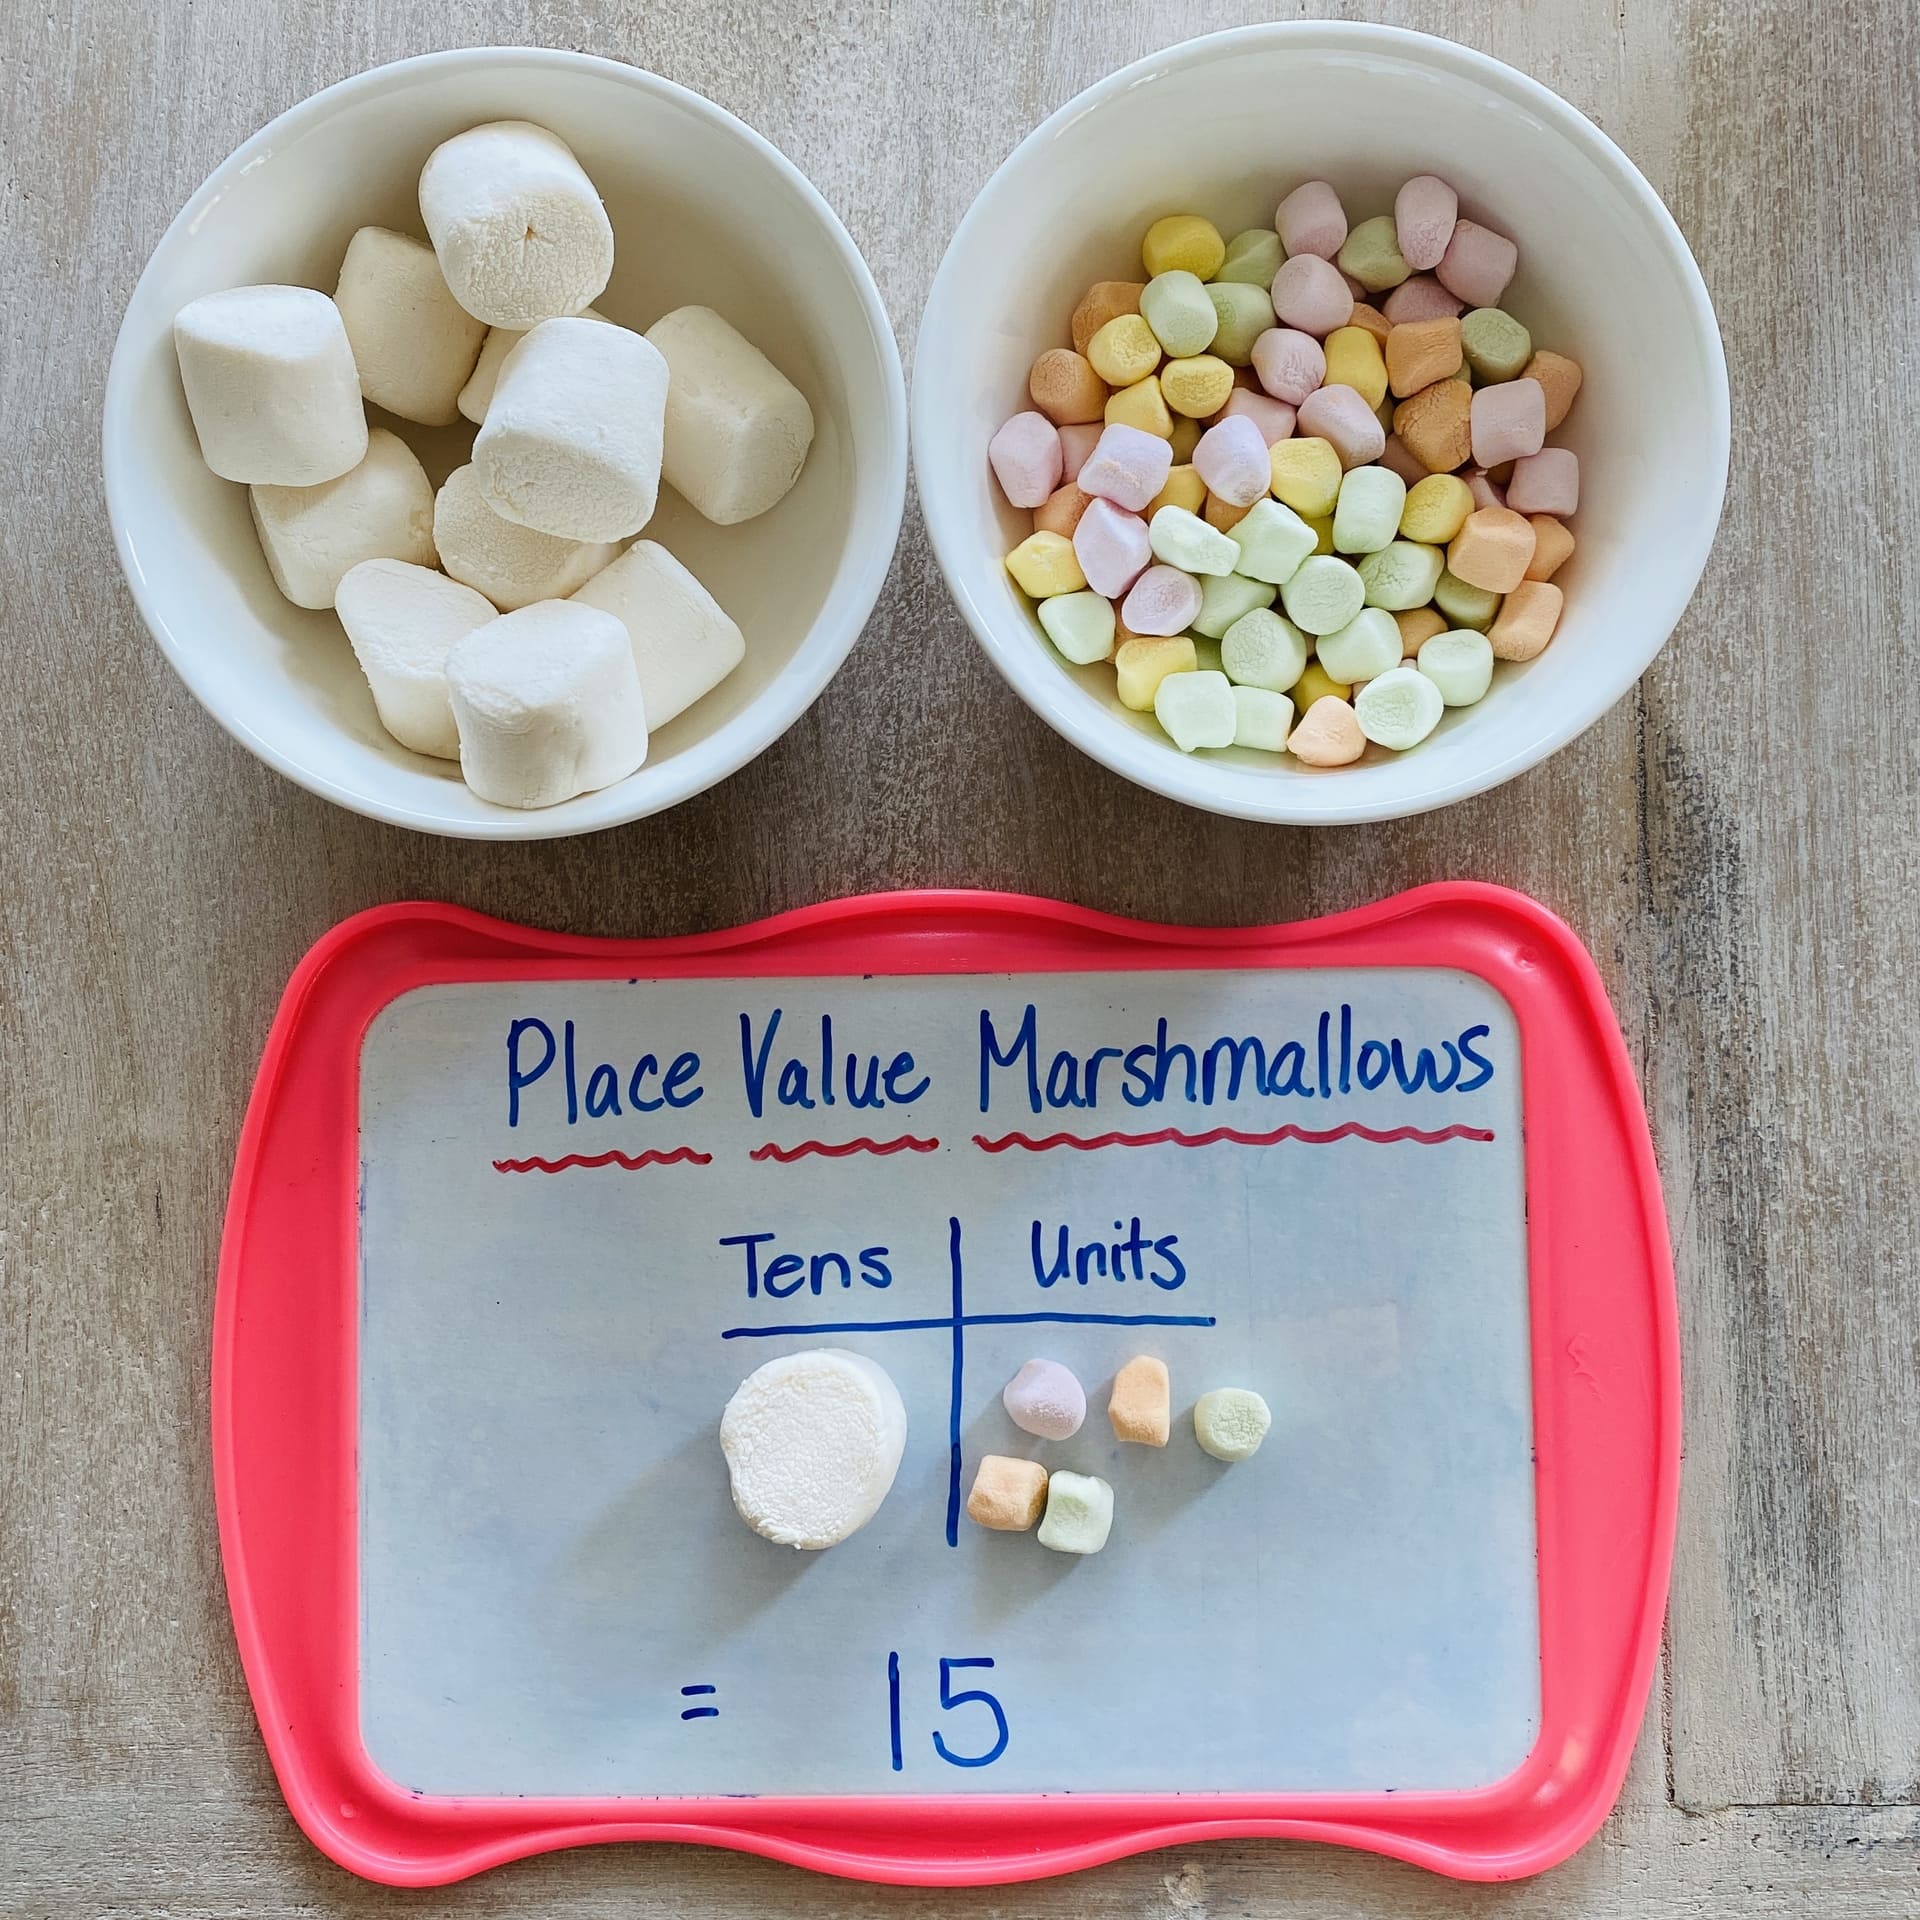 Marshmallow Place Value hands-on maths activity